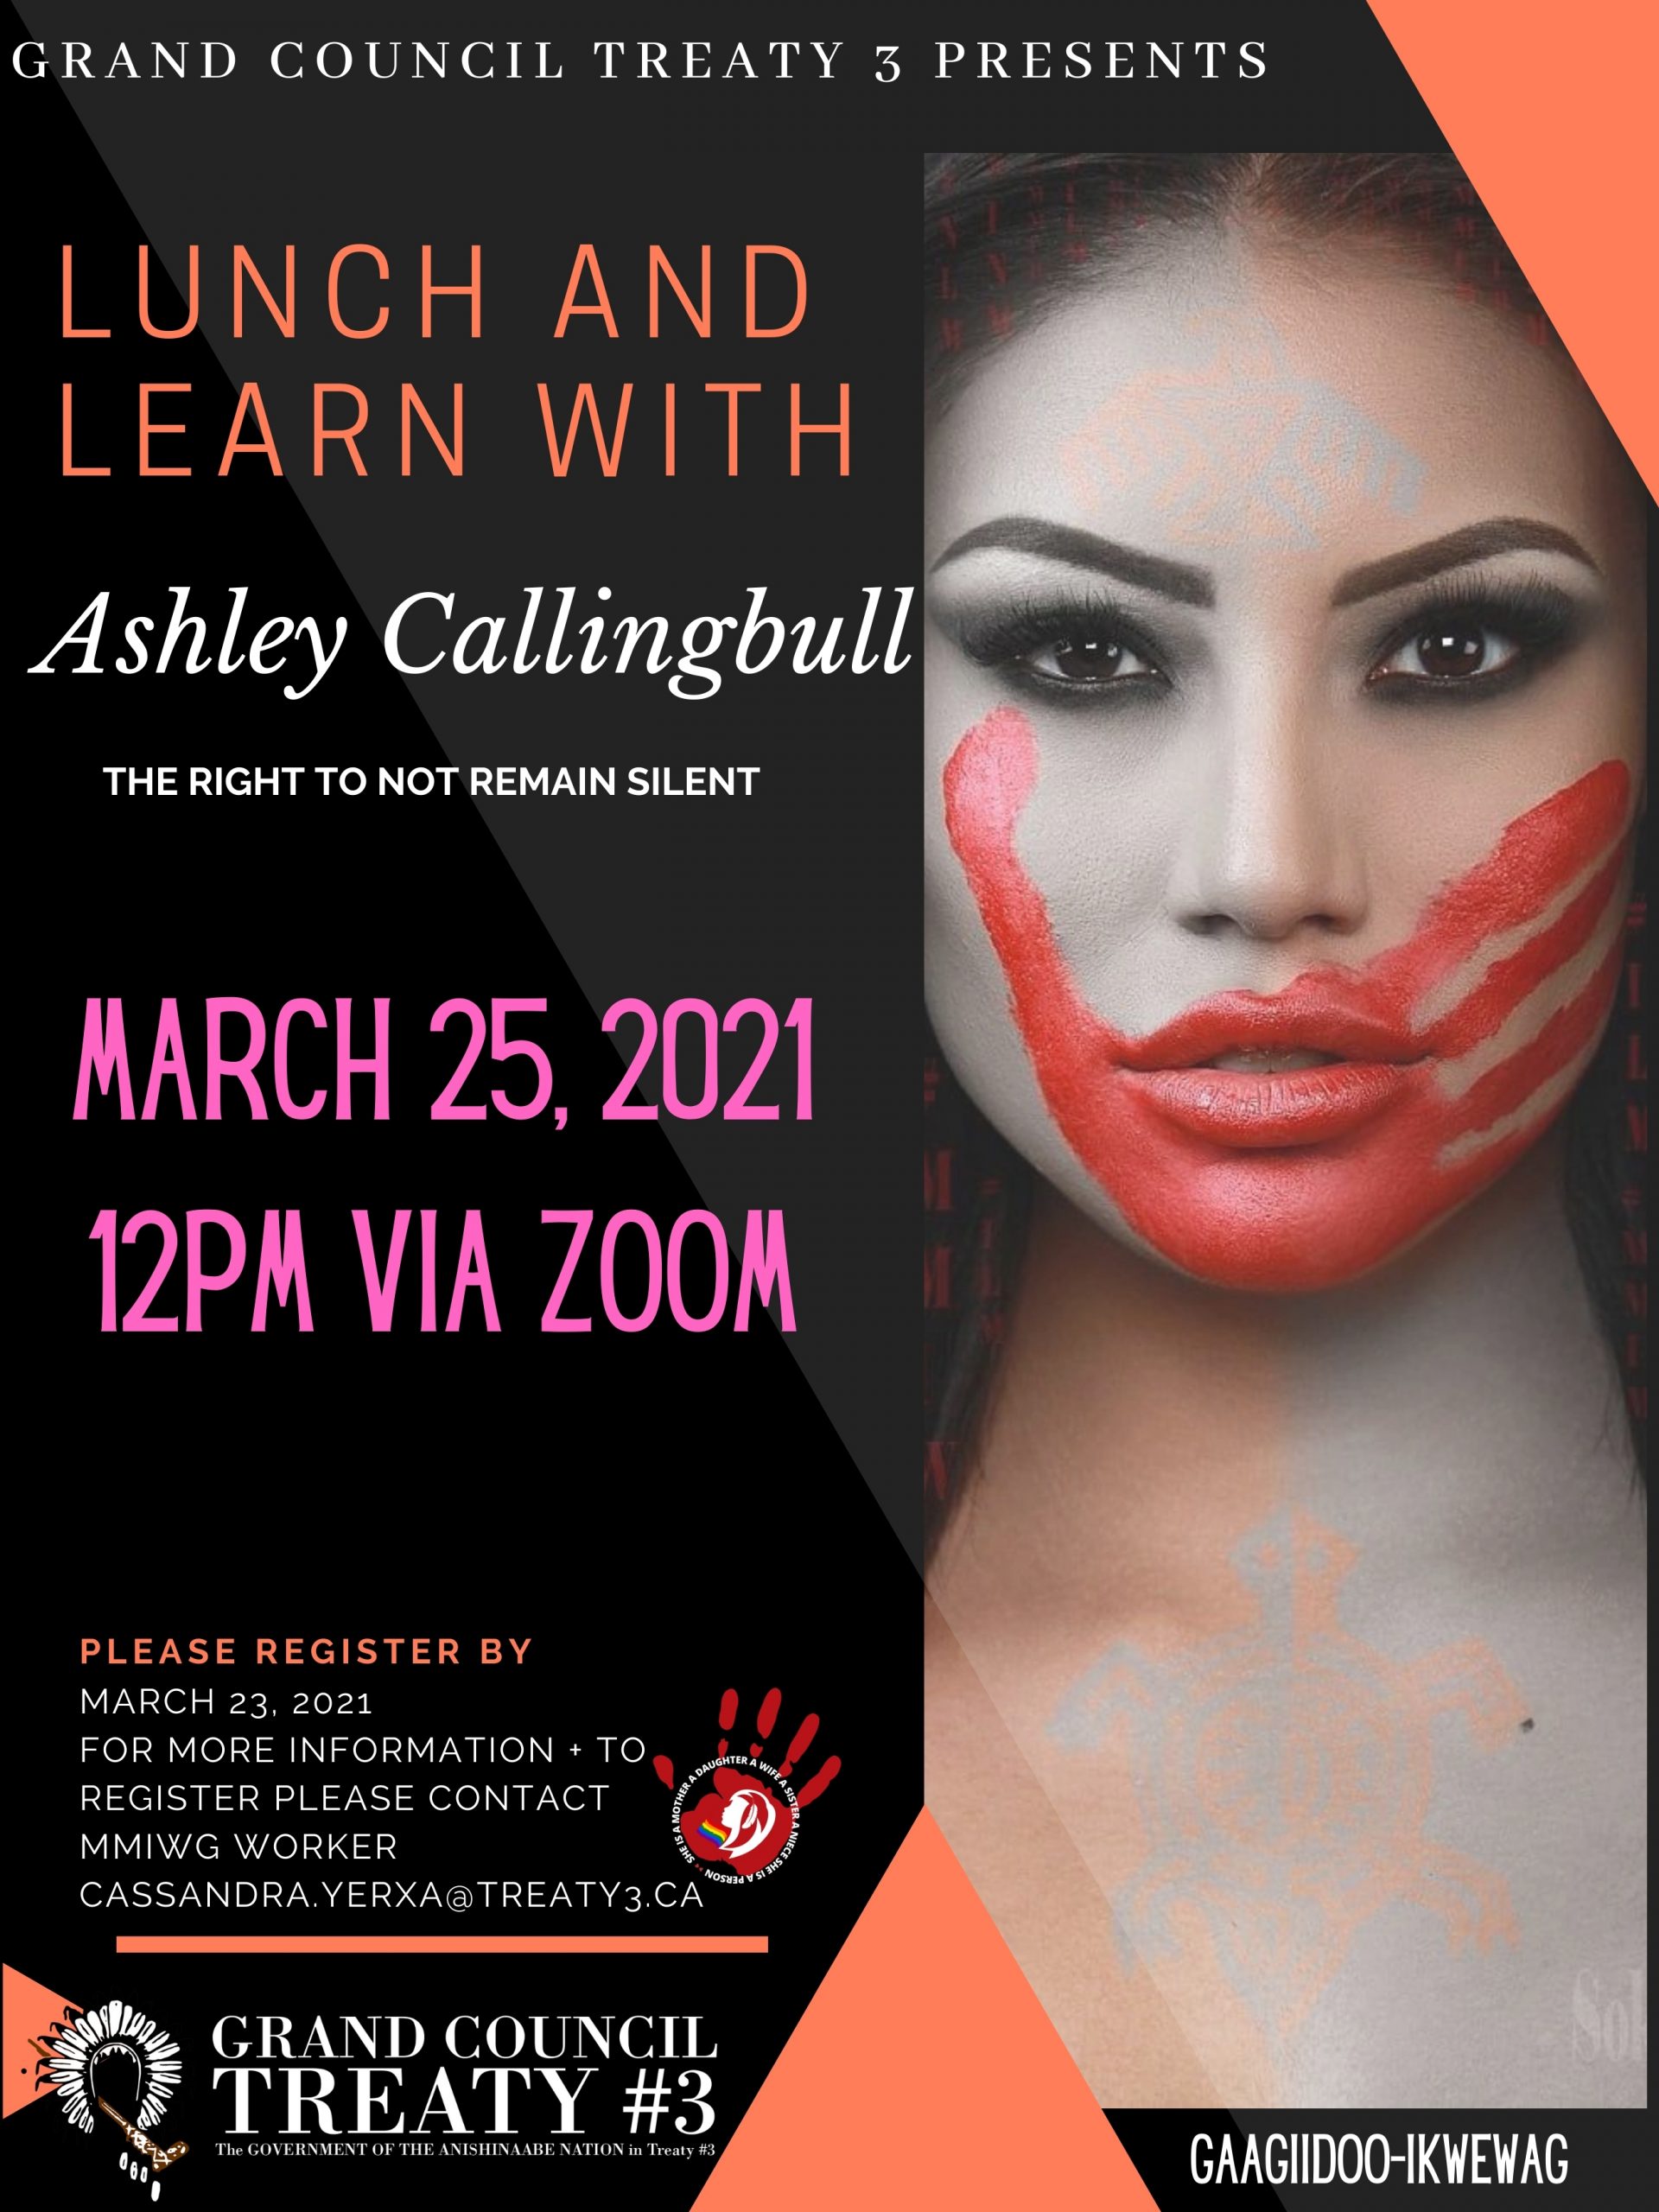 Lunch and Learn with Ashley Callingbull